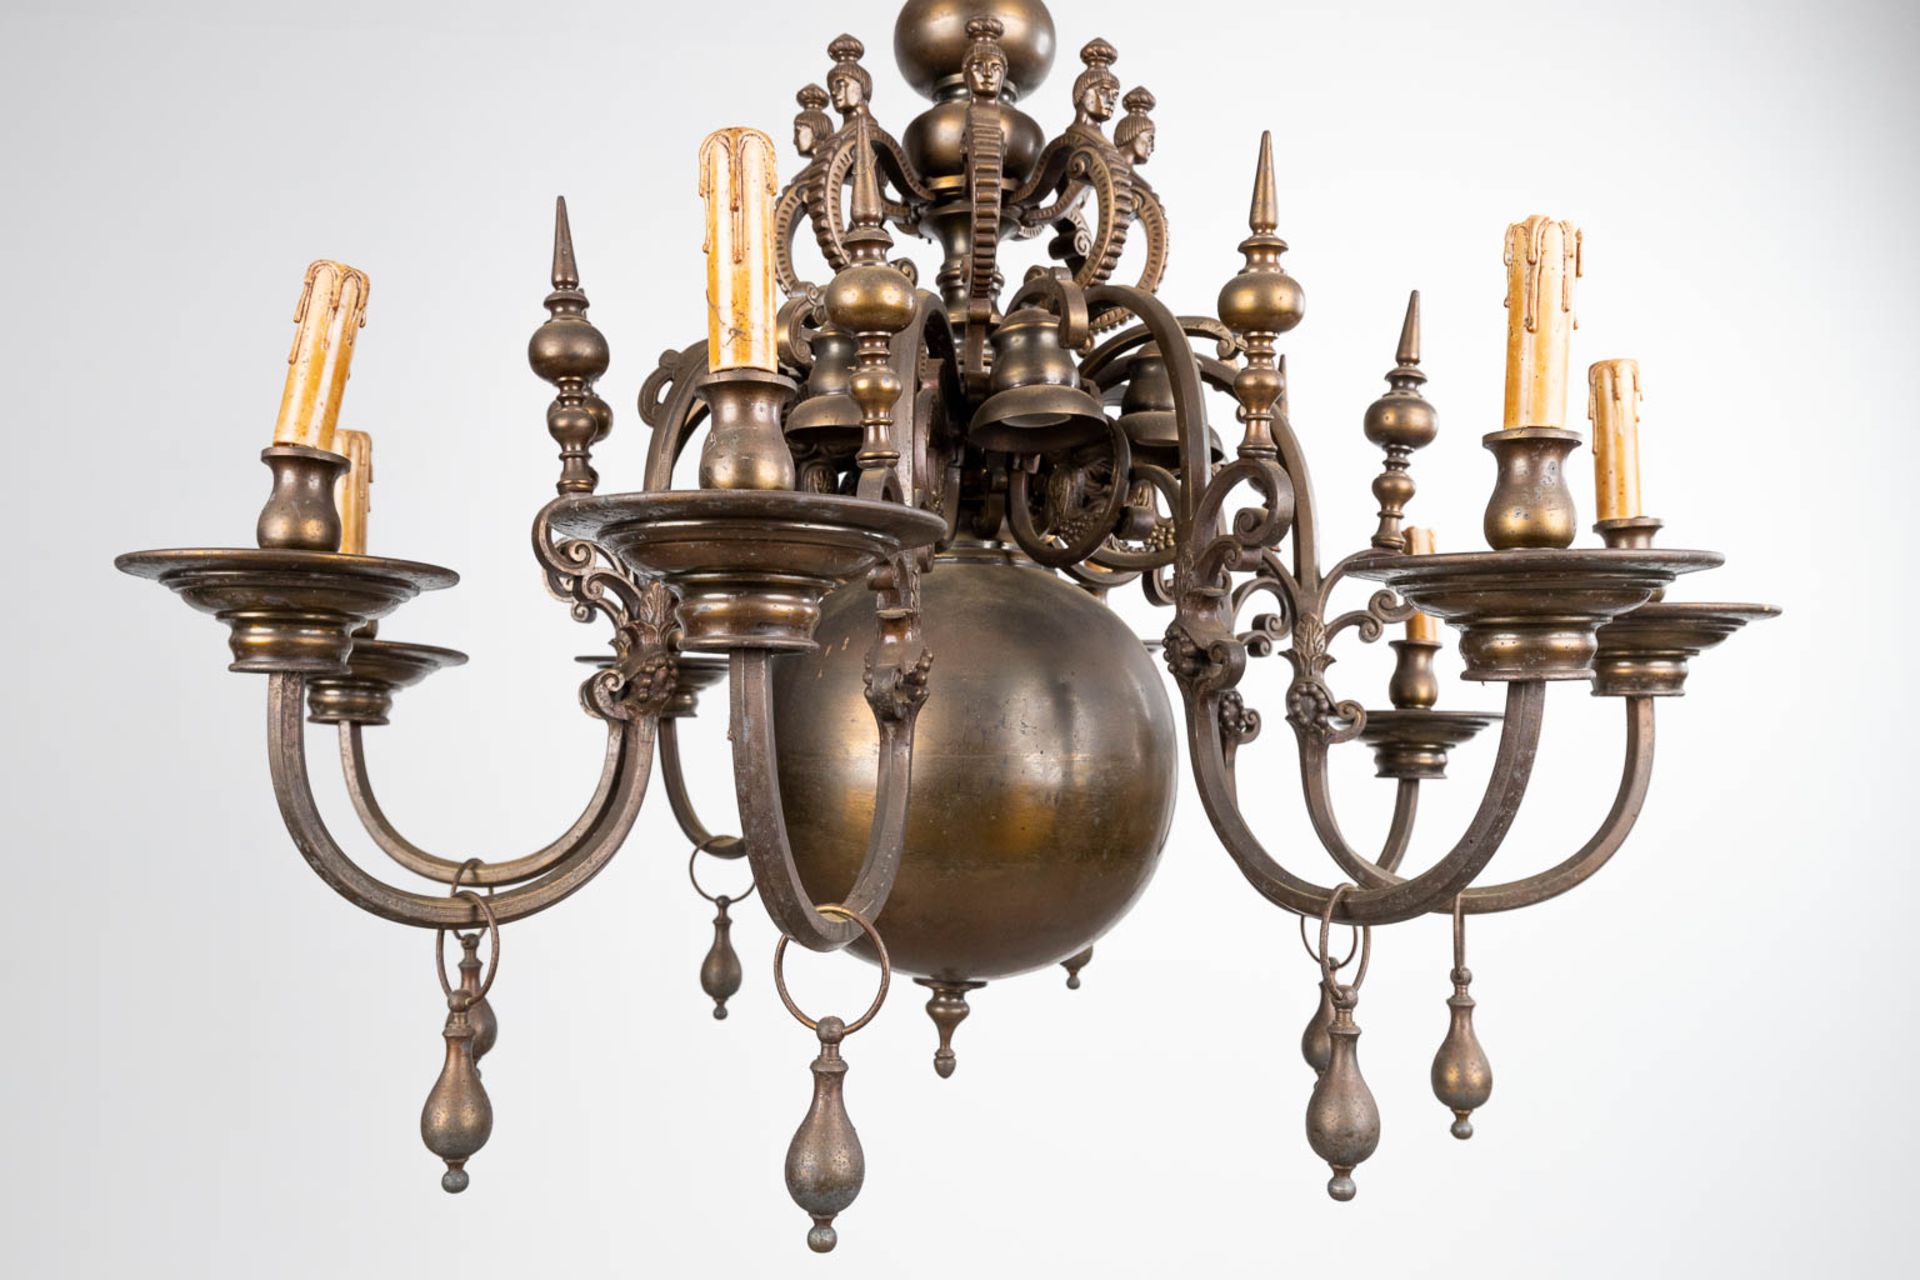 A large Flemish chandelier made of bronze, decorated with a figurine riding a mythological creature. - Bild 3 aus 11